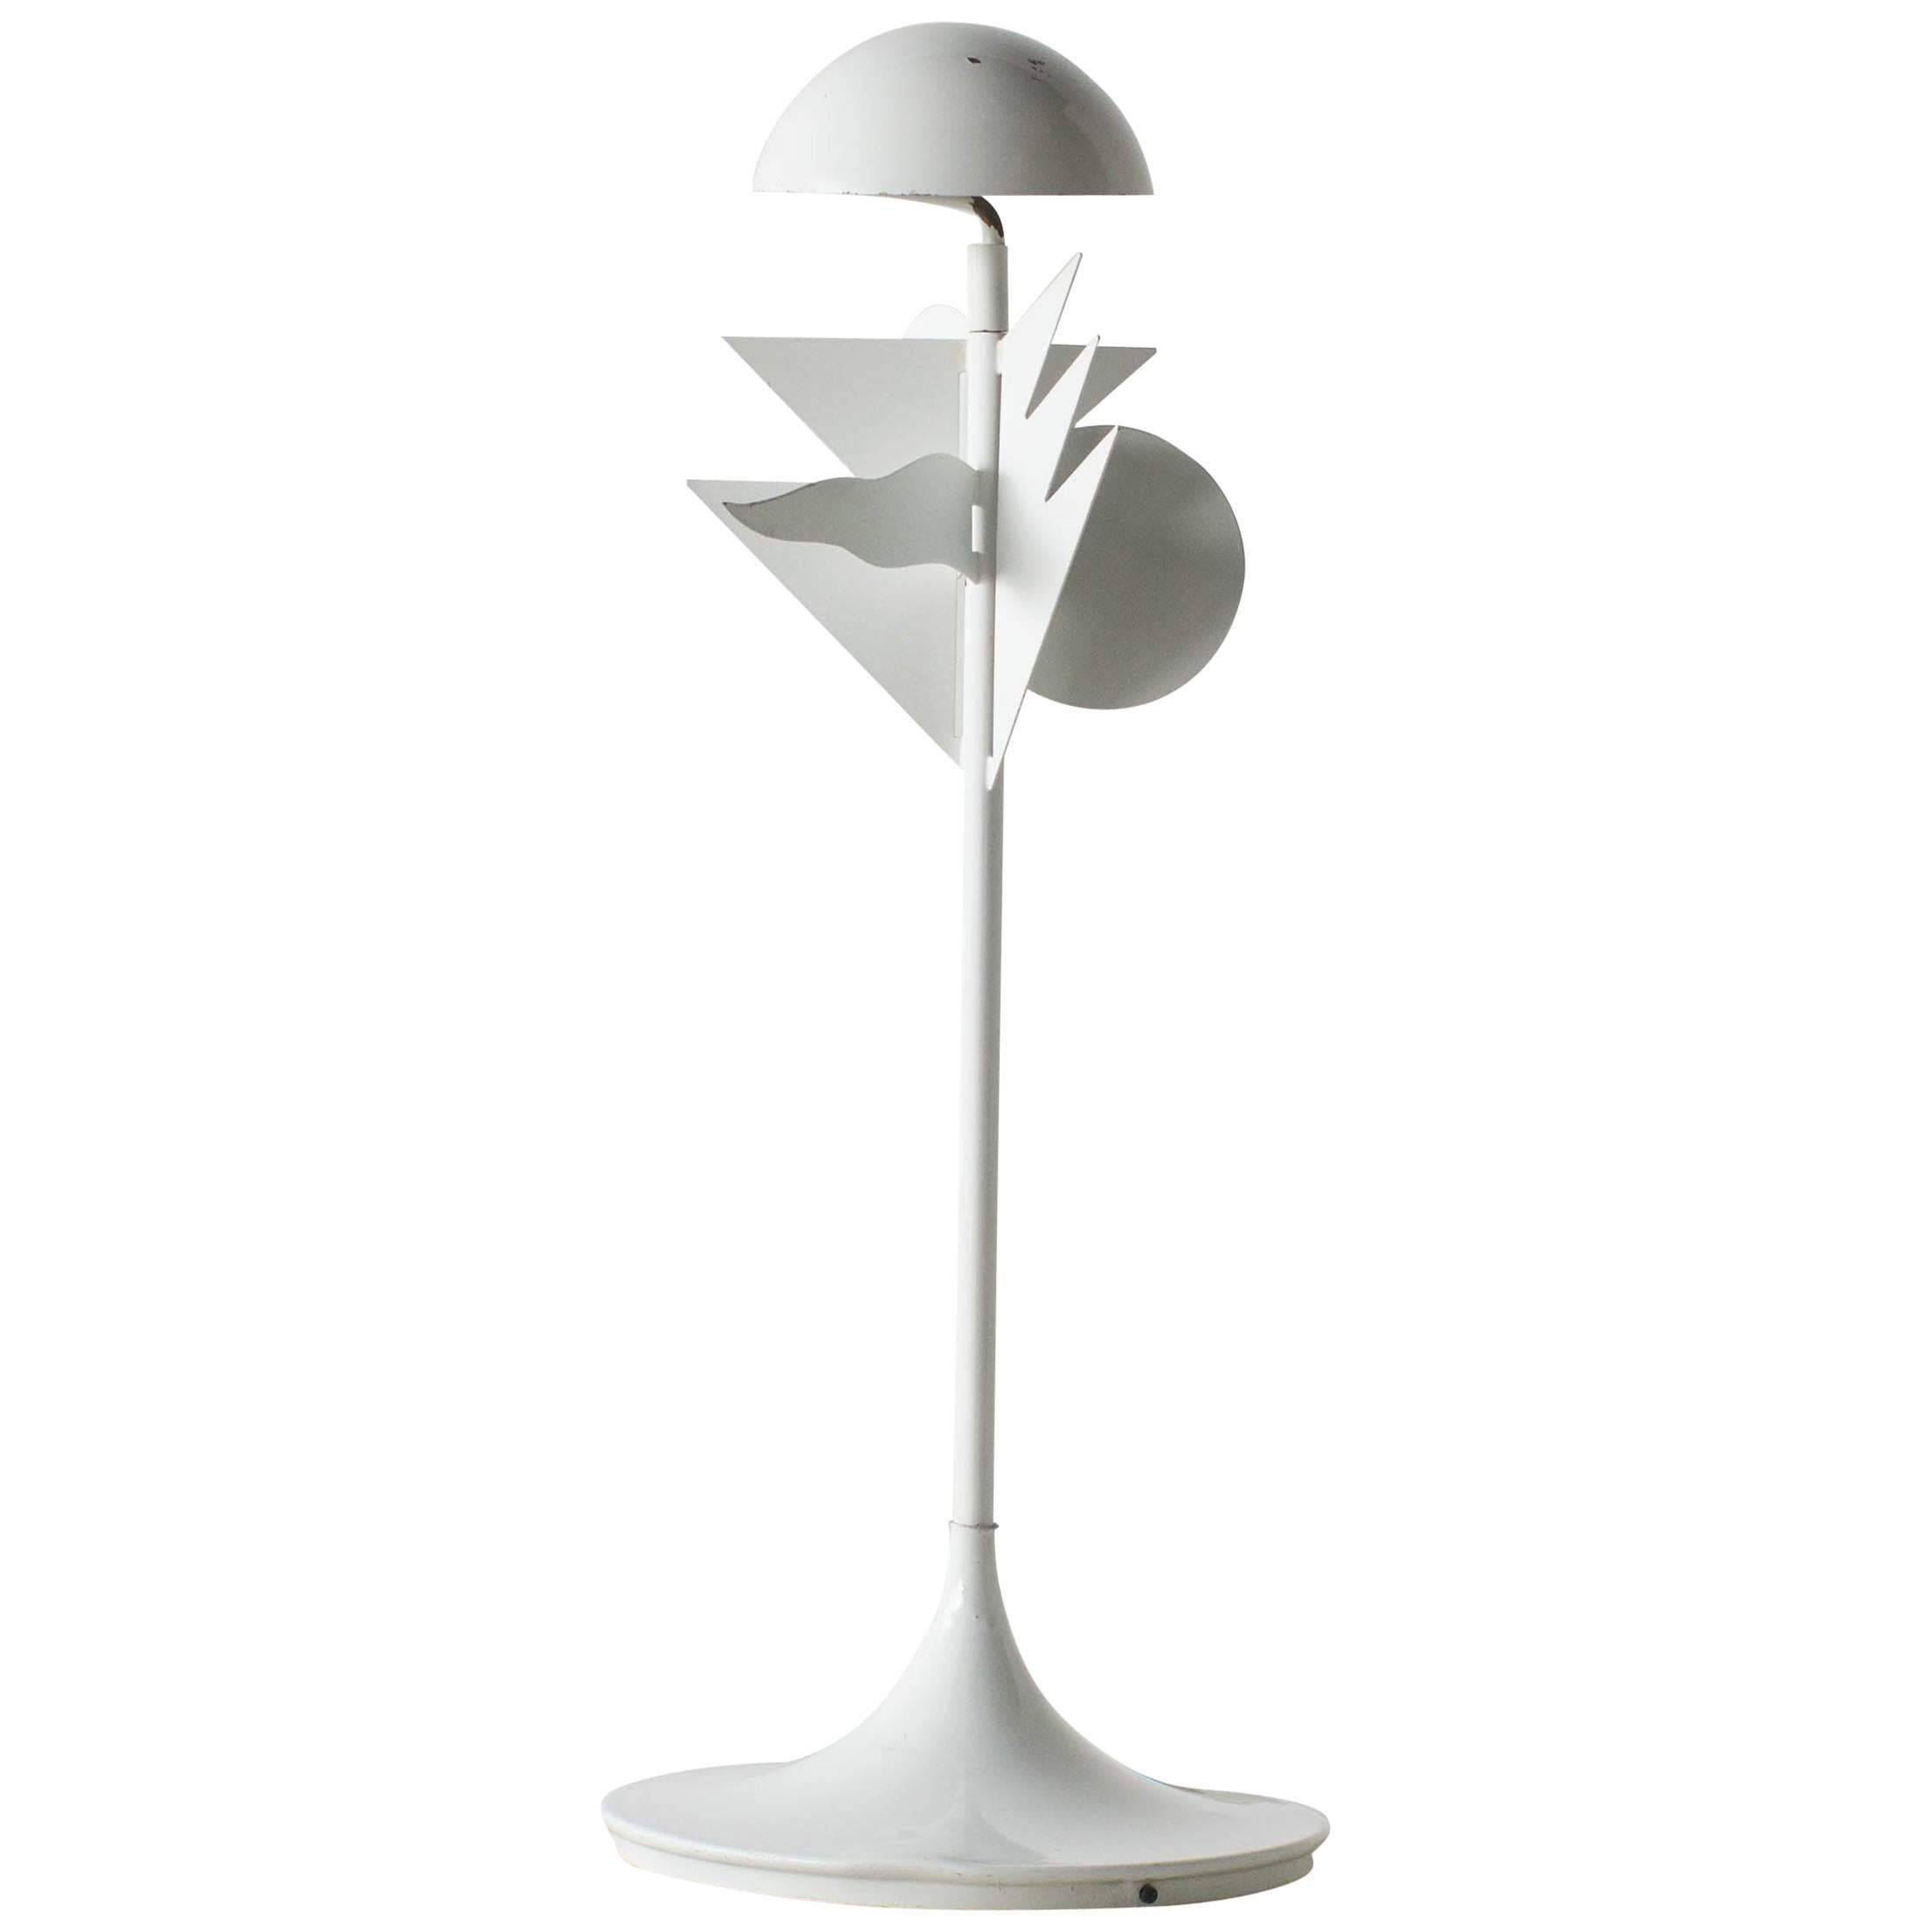 Papalina floor lamp. Alessandro Mendini Designed in 1983 for Eleusi.
Hard to find lamp. You can find repeated using motiff like a group of flags by Mendini.
Table lamp model is available too.